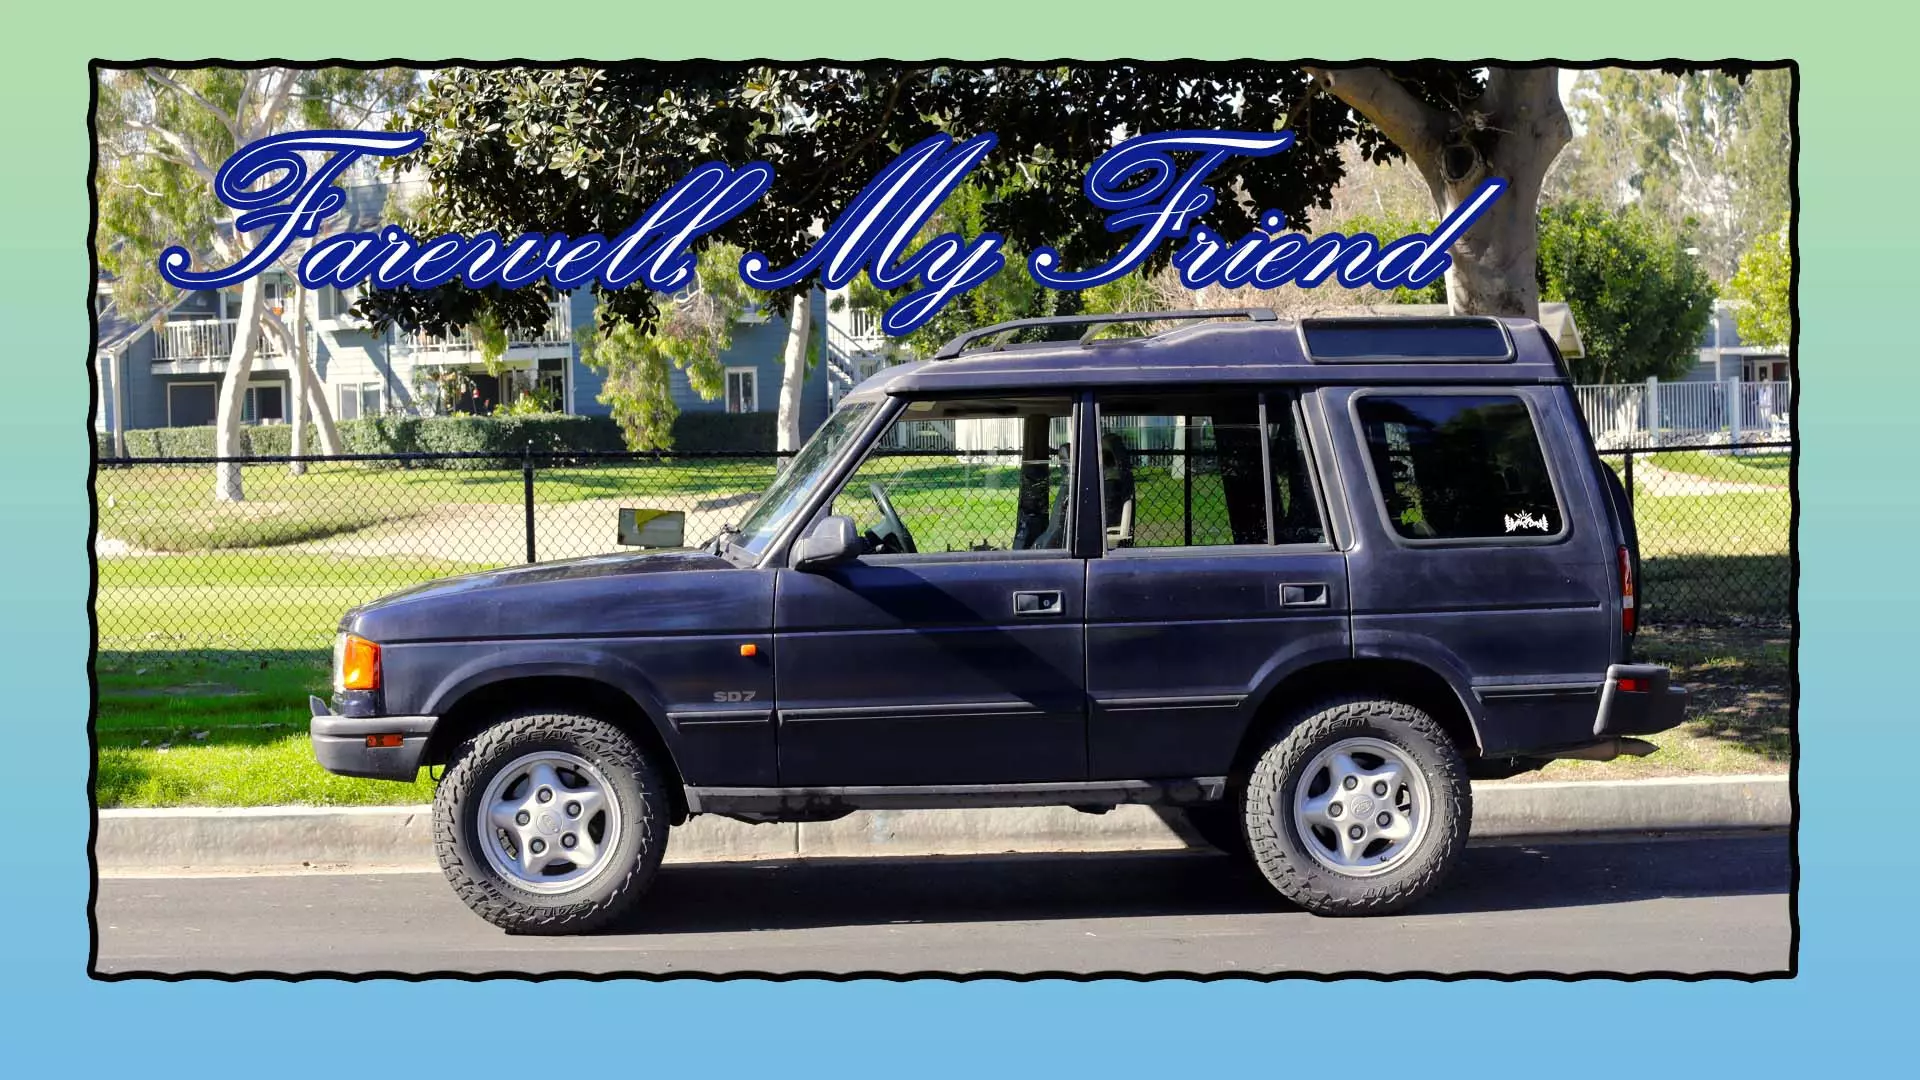 My Land Rover Discovery Is Gone. Here&#8217;s What I Learned From 10 Months of Wrenching